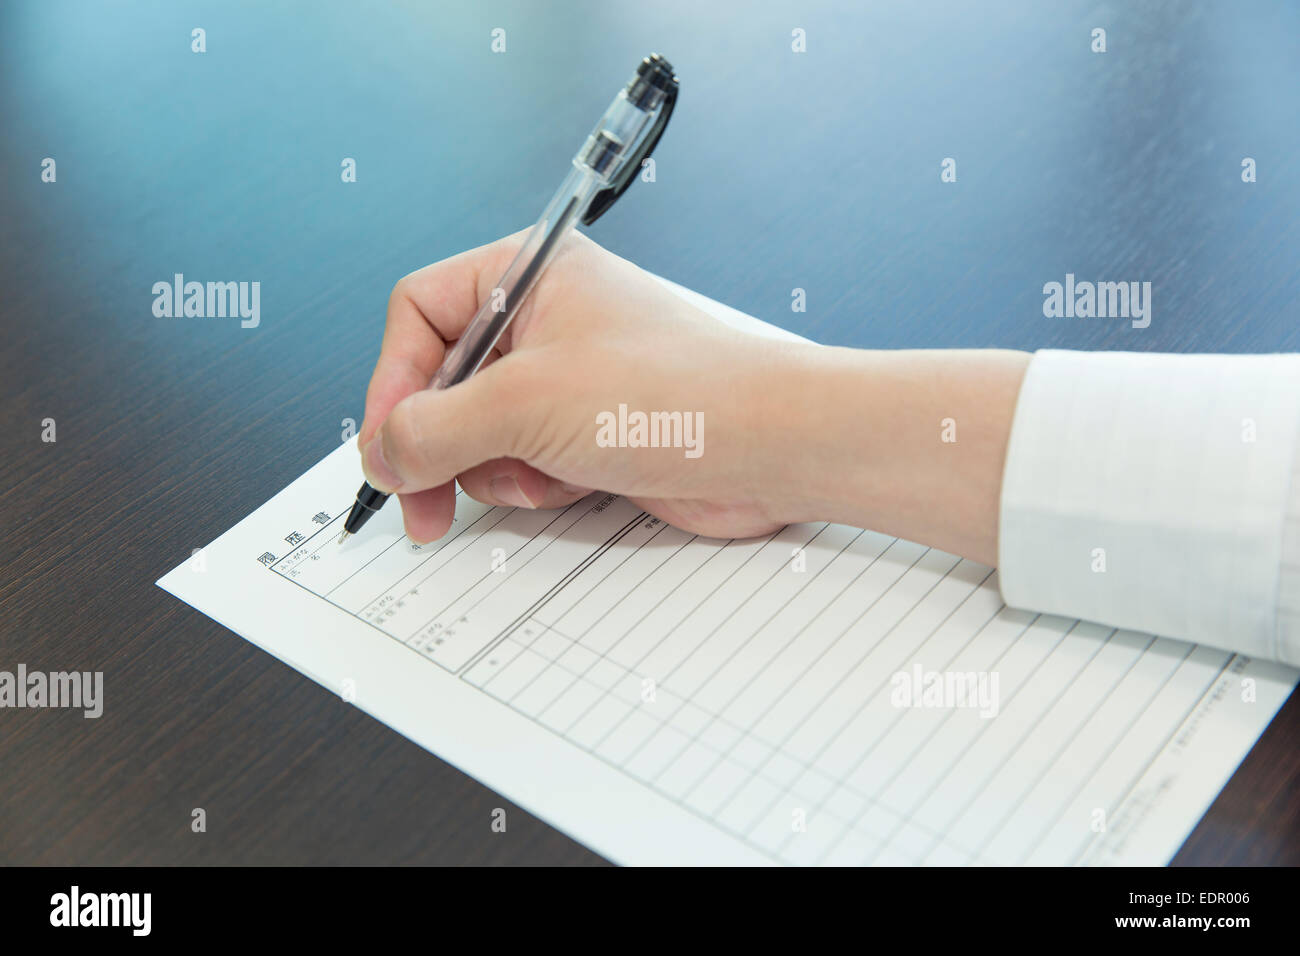 Woman Hand with Pen Filling out Job Application Stock Photo